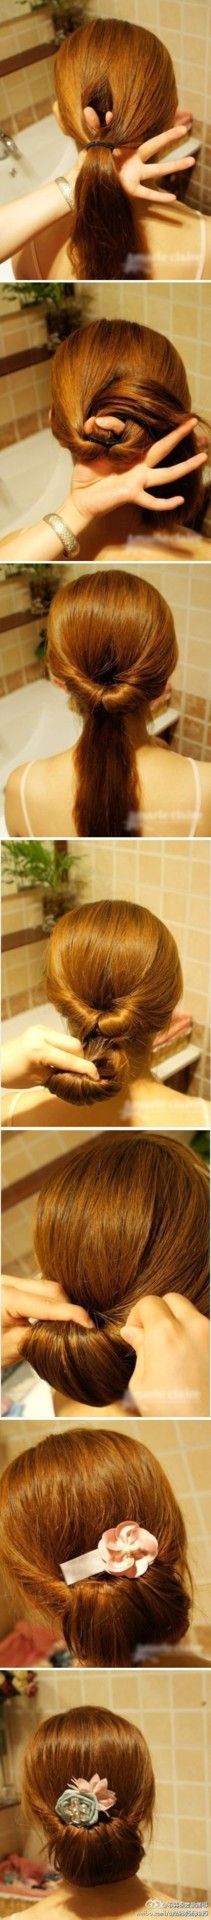 hair idea…i have seen this before, i had no idea it was so easy!